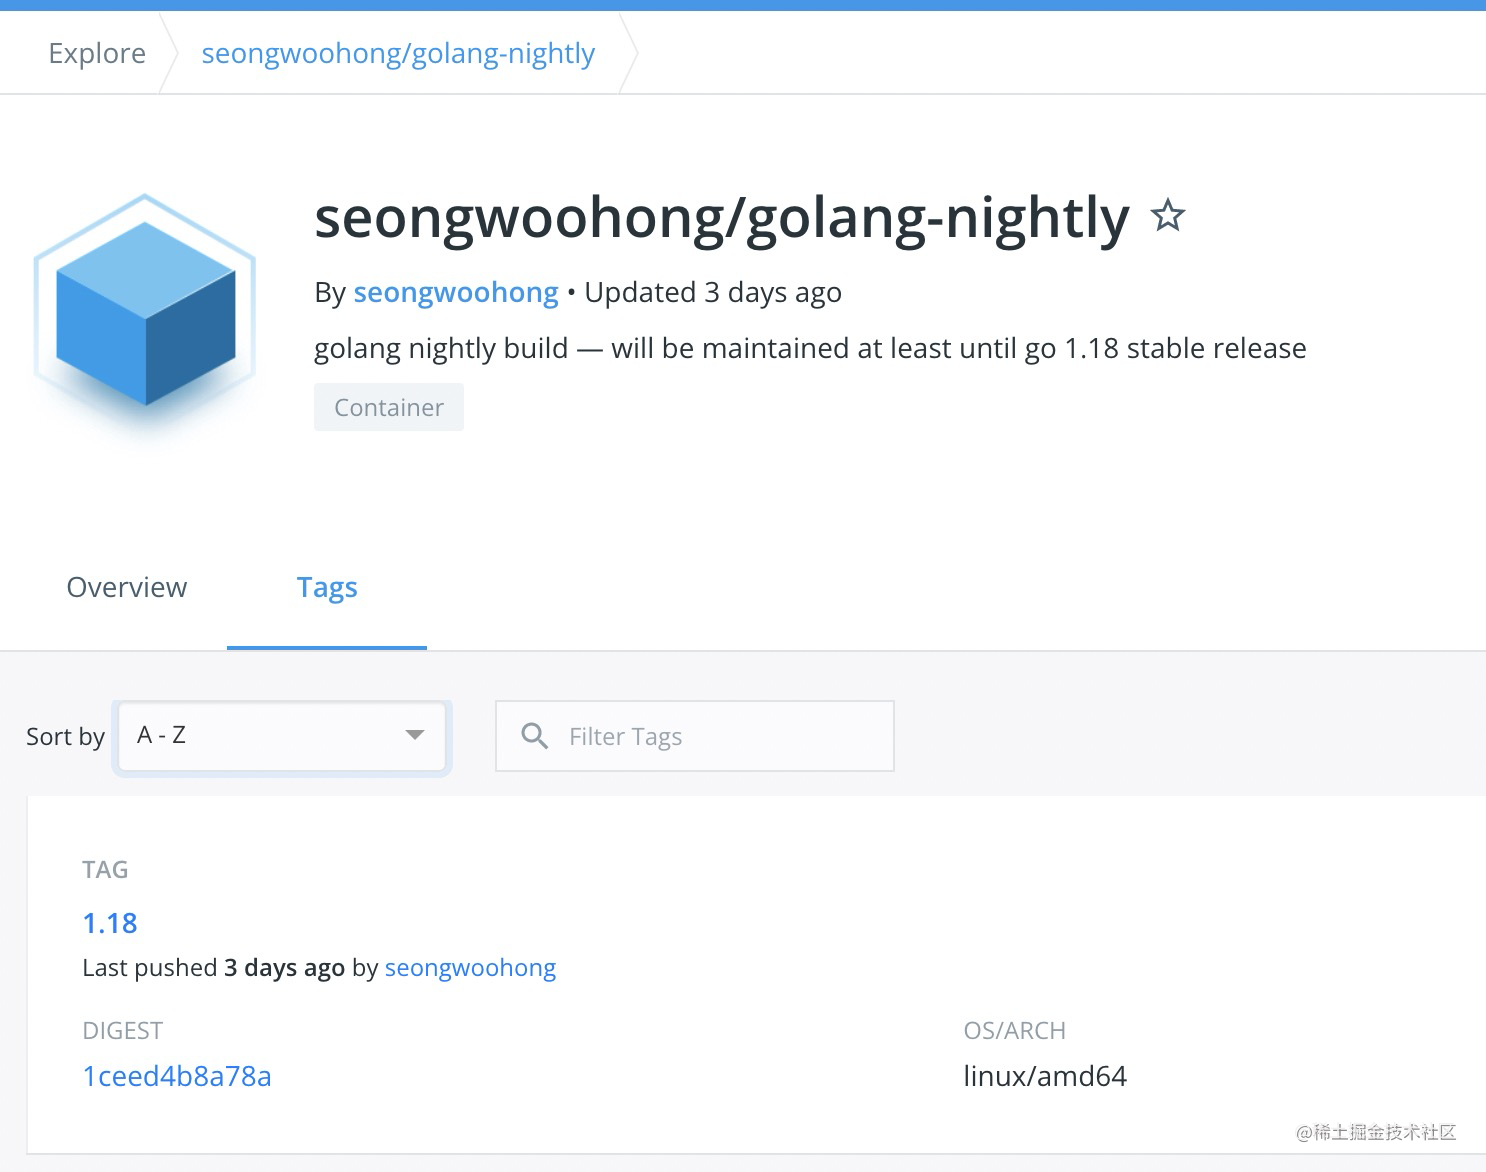 golang-nightly-image.png